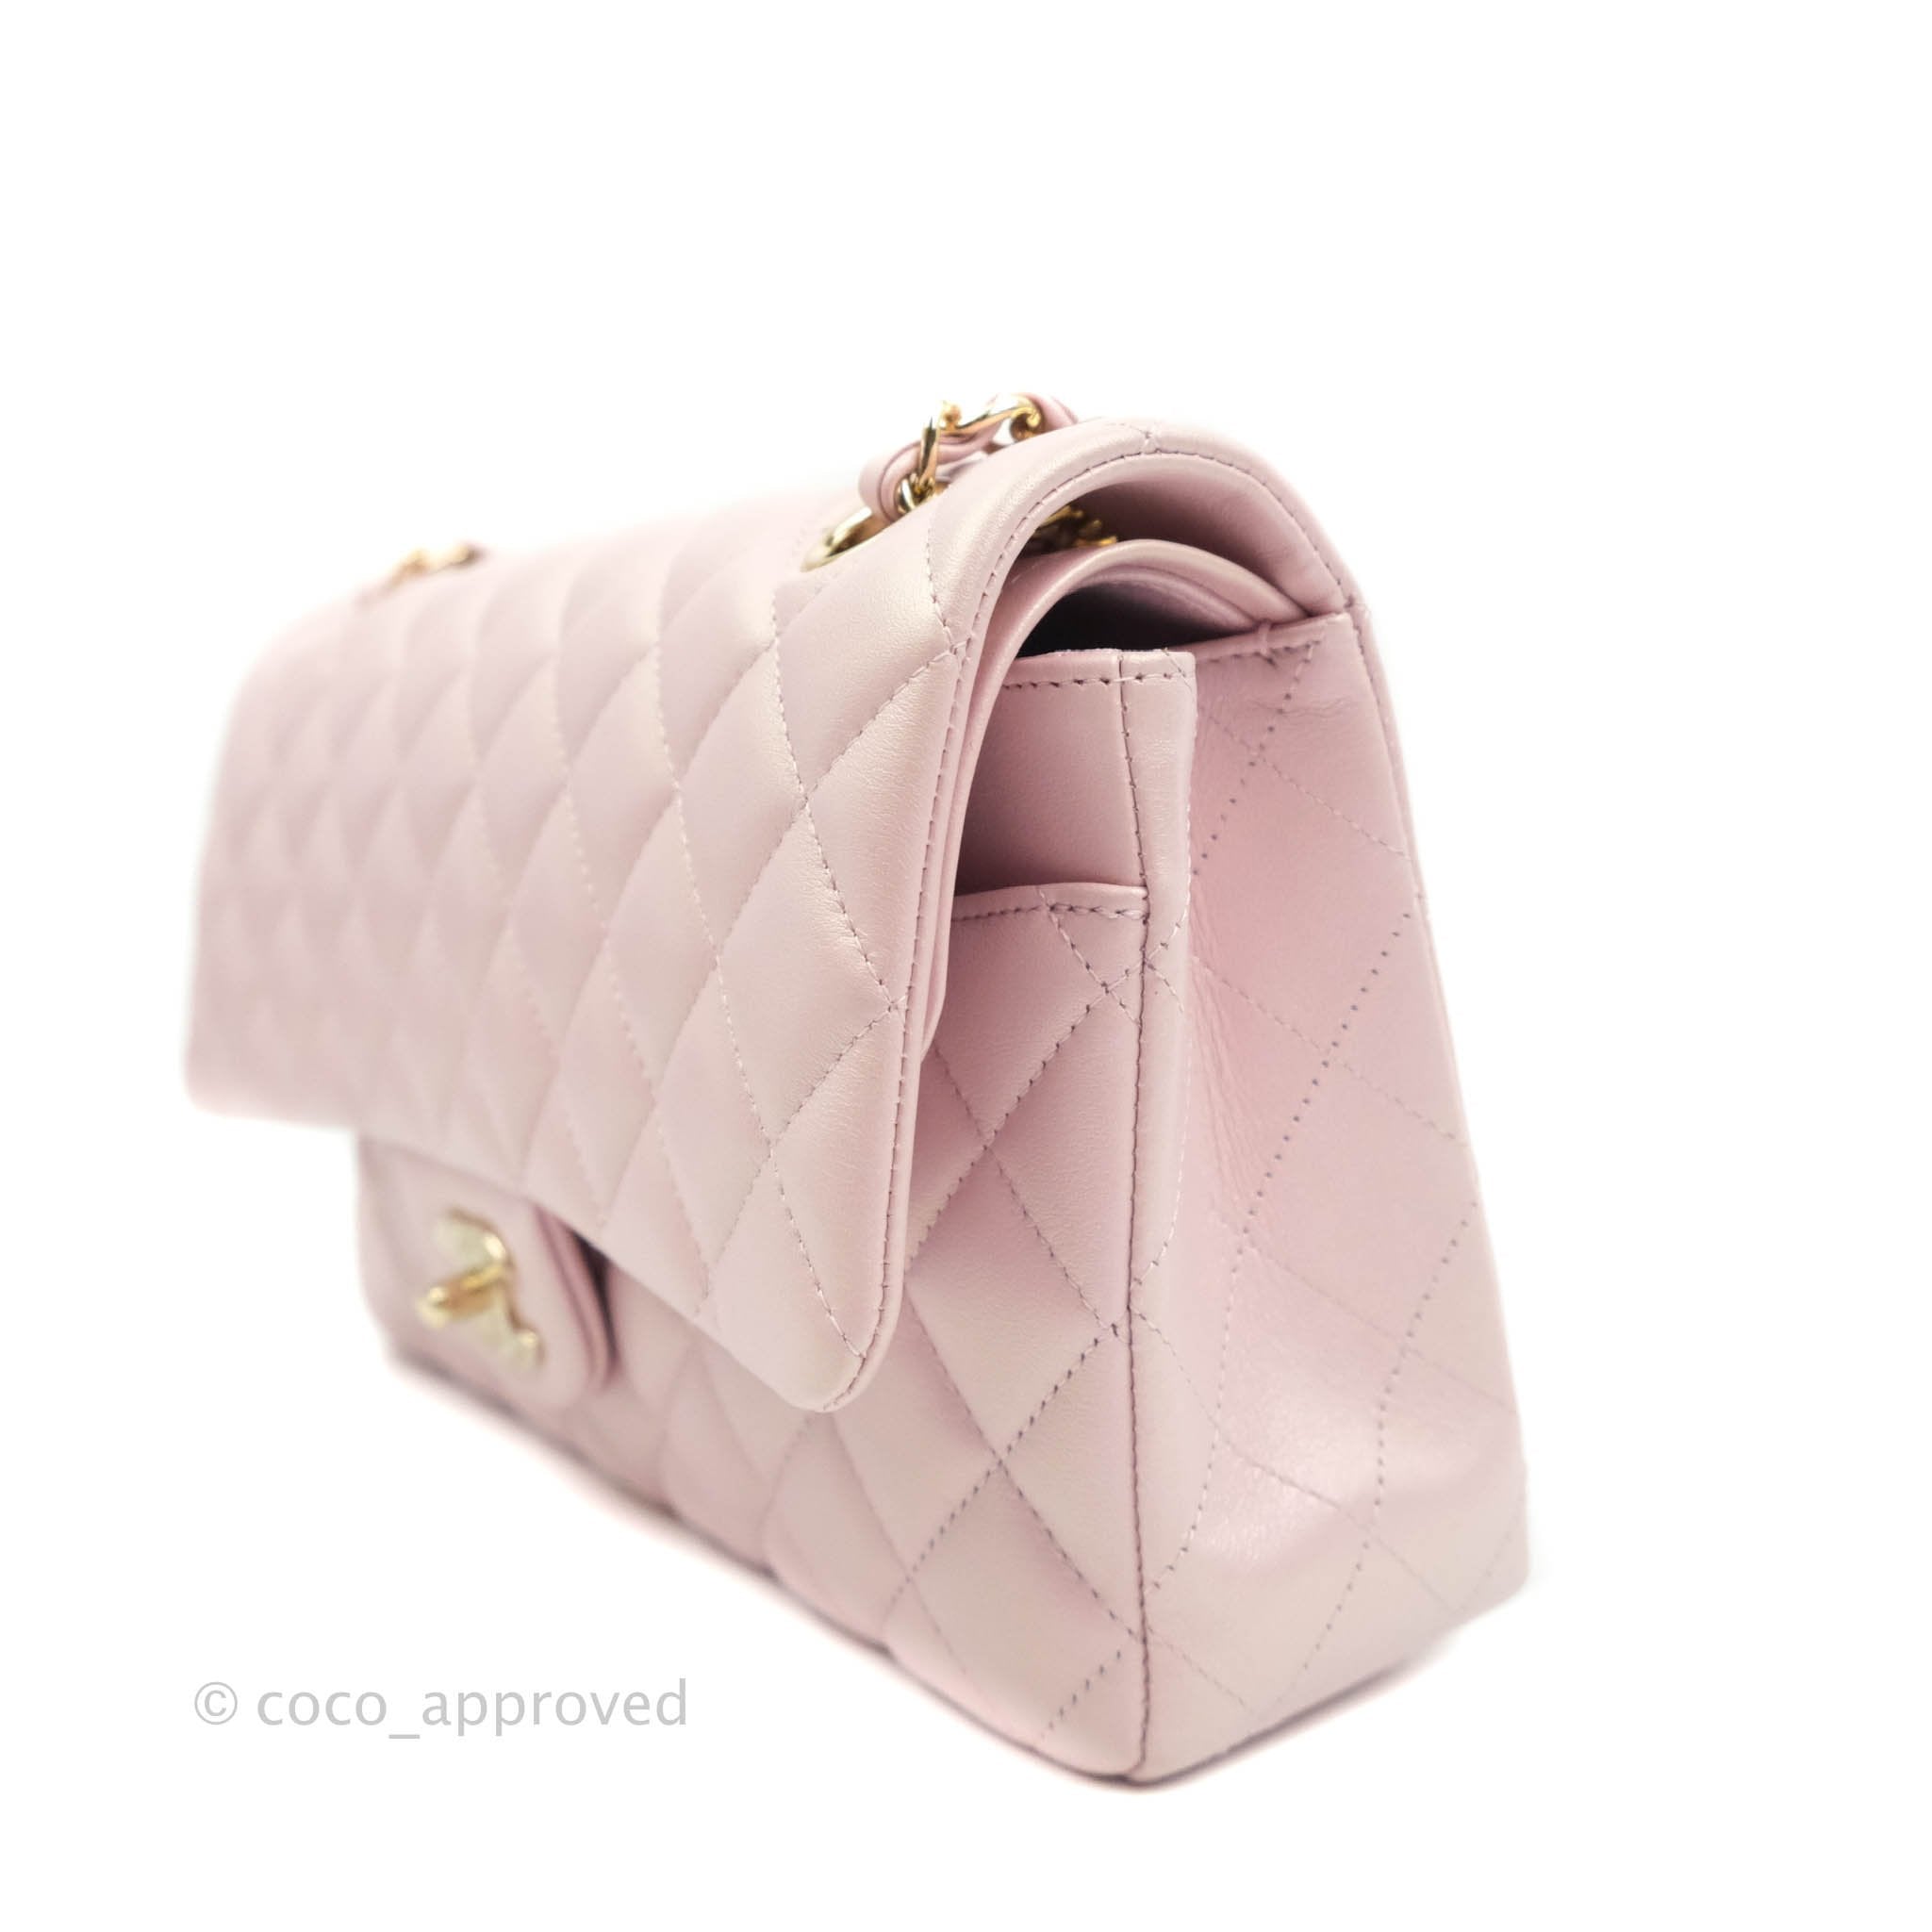 Chanel Iridescent Pink Quilted Lambskin Medium Classic Double Flap Bag